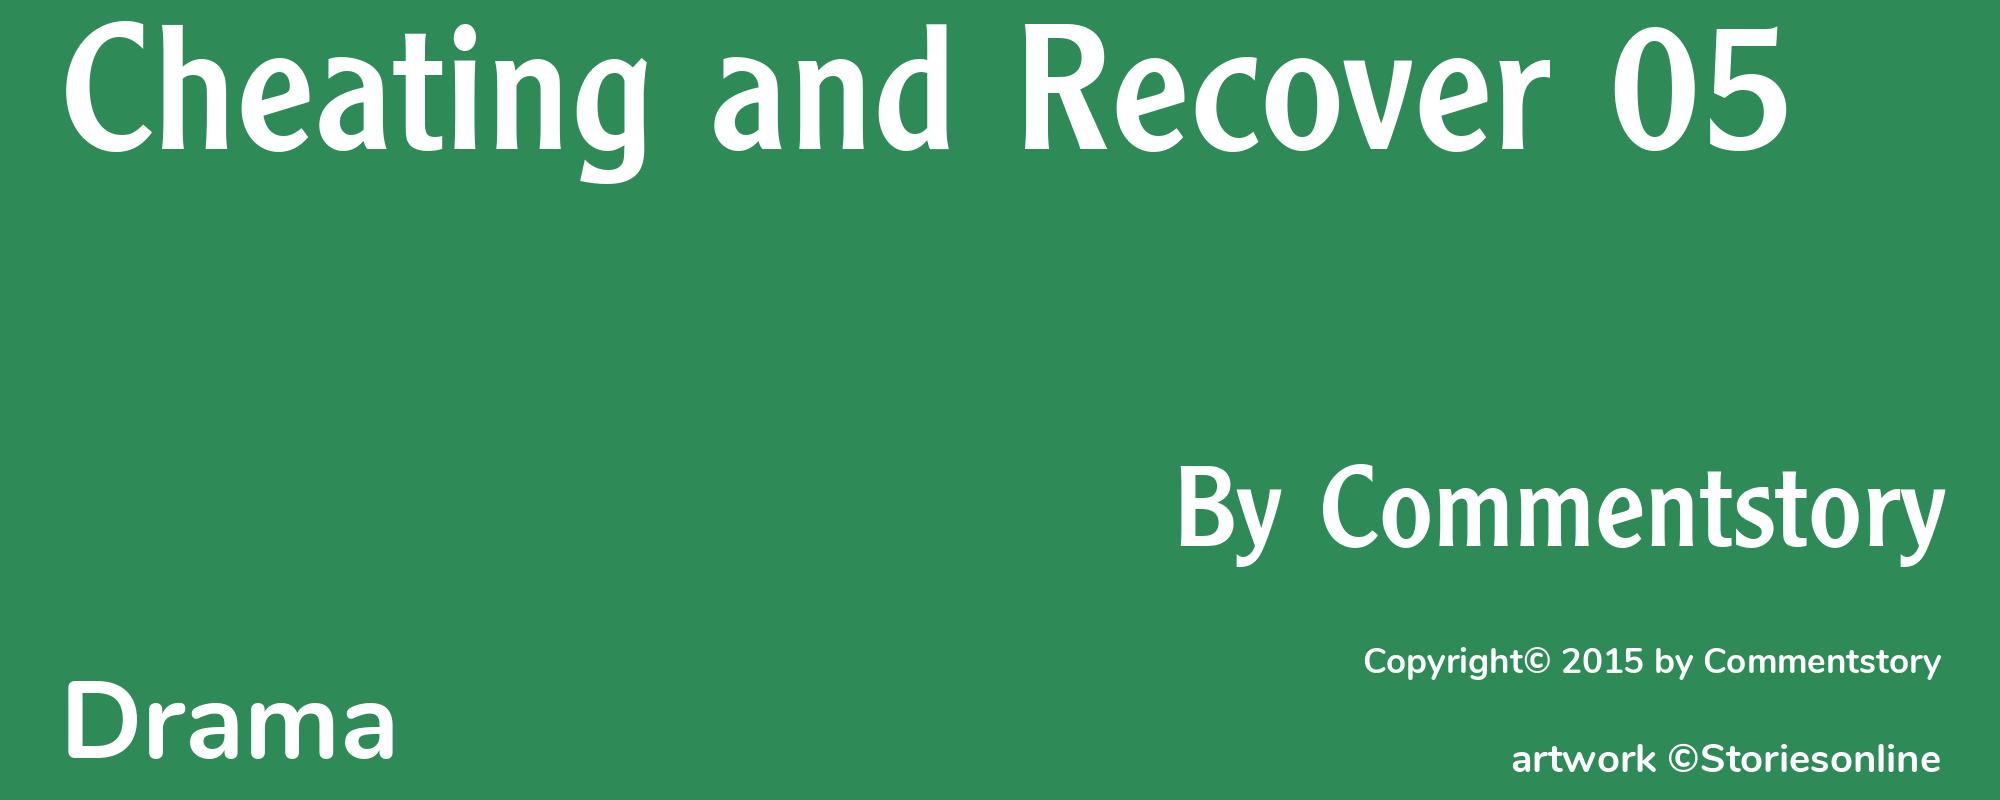 Cheating and Recover 05 - Cover